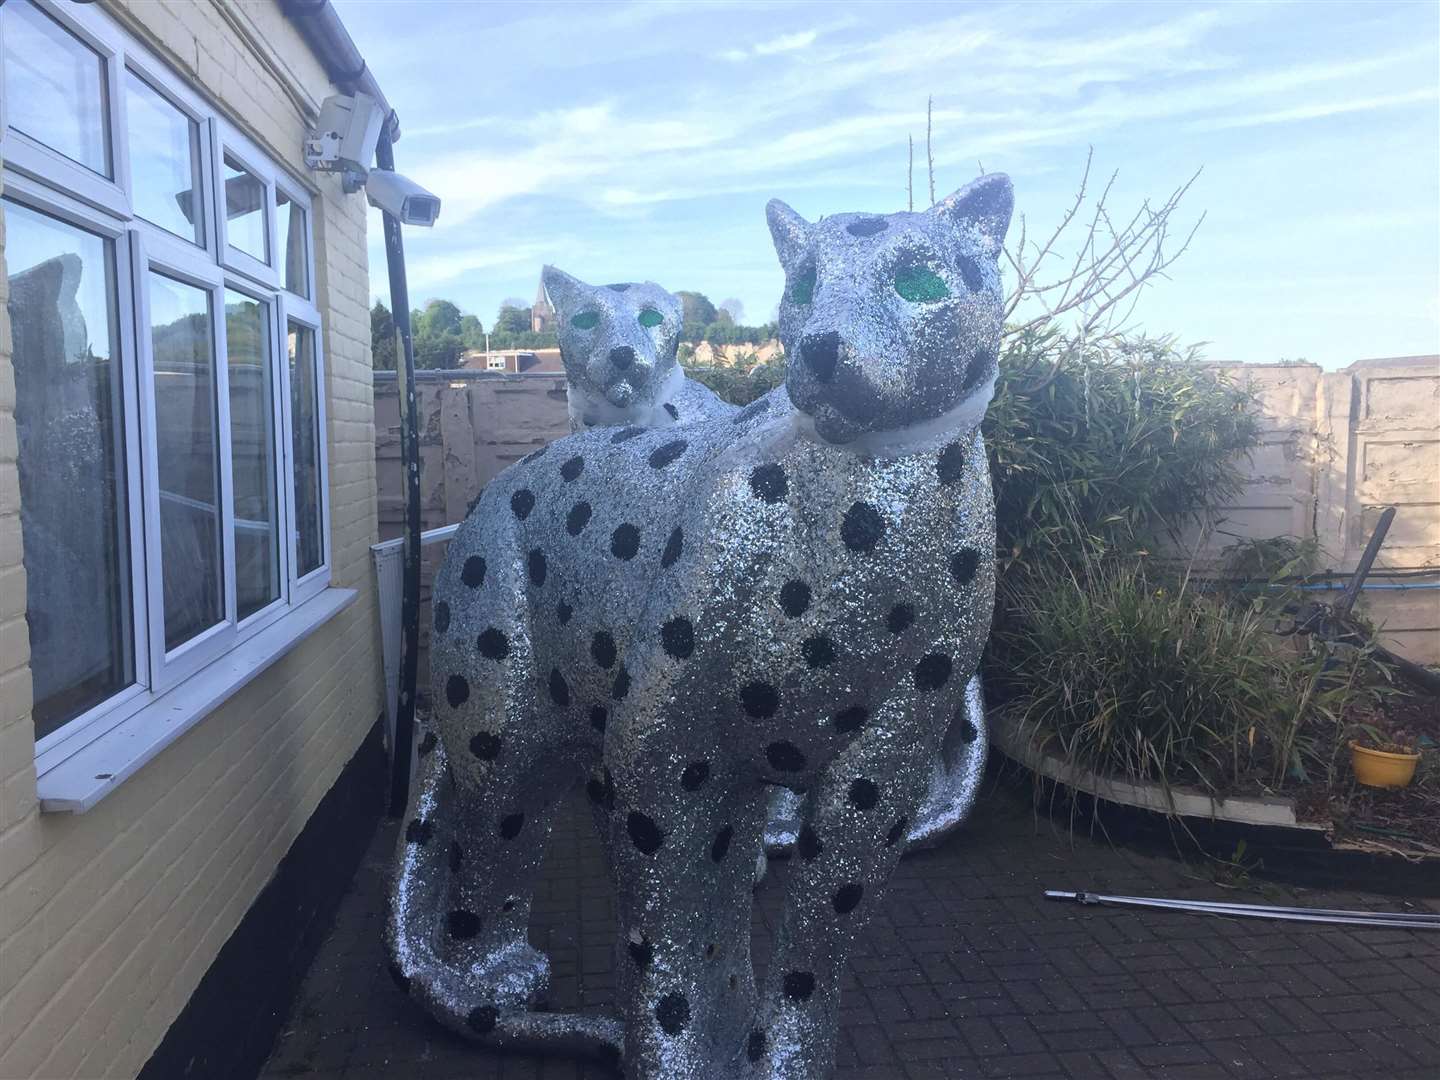 The Riverside Tavern homes two big sparkly cats